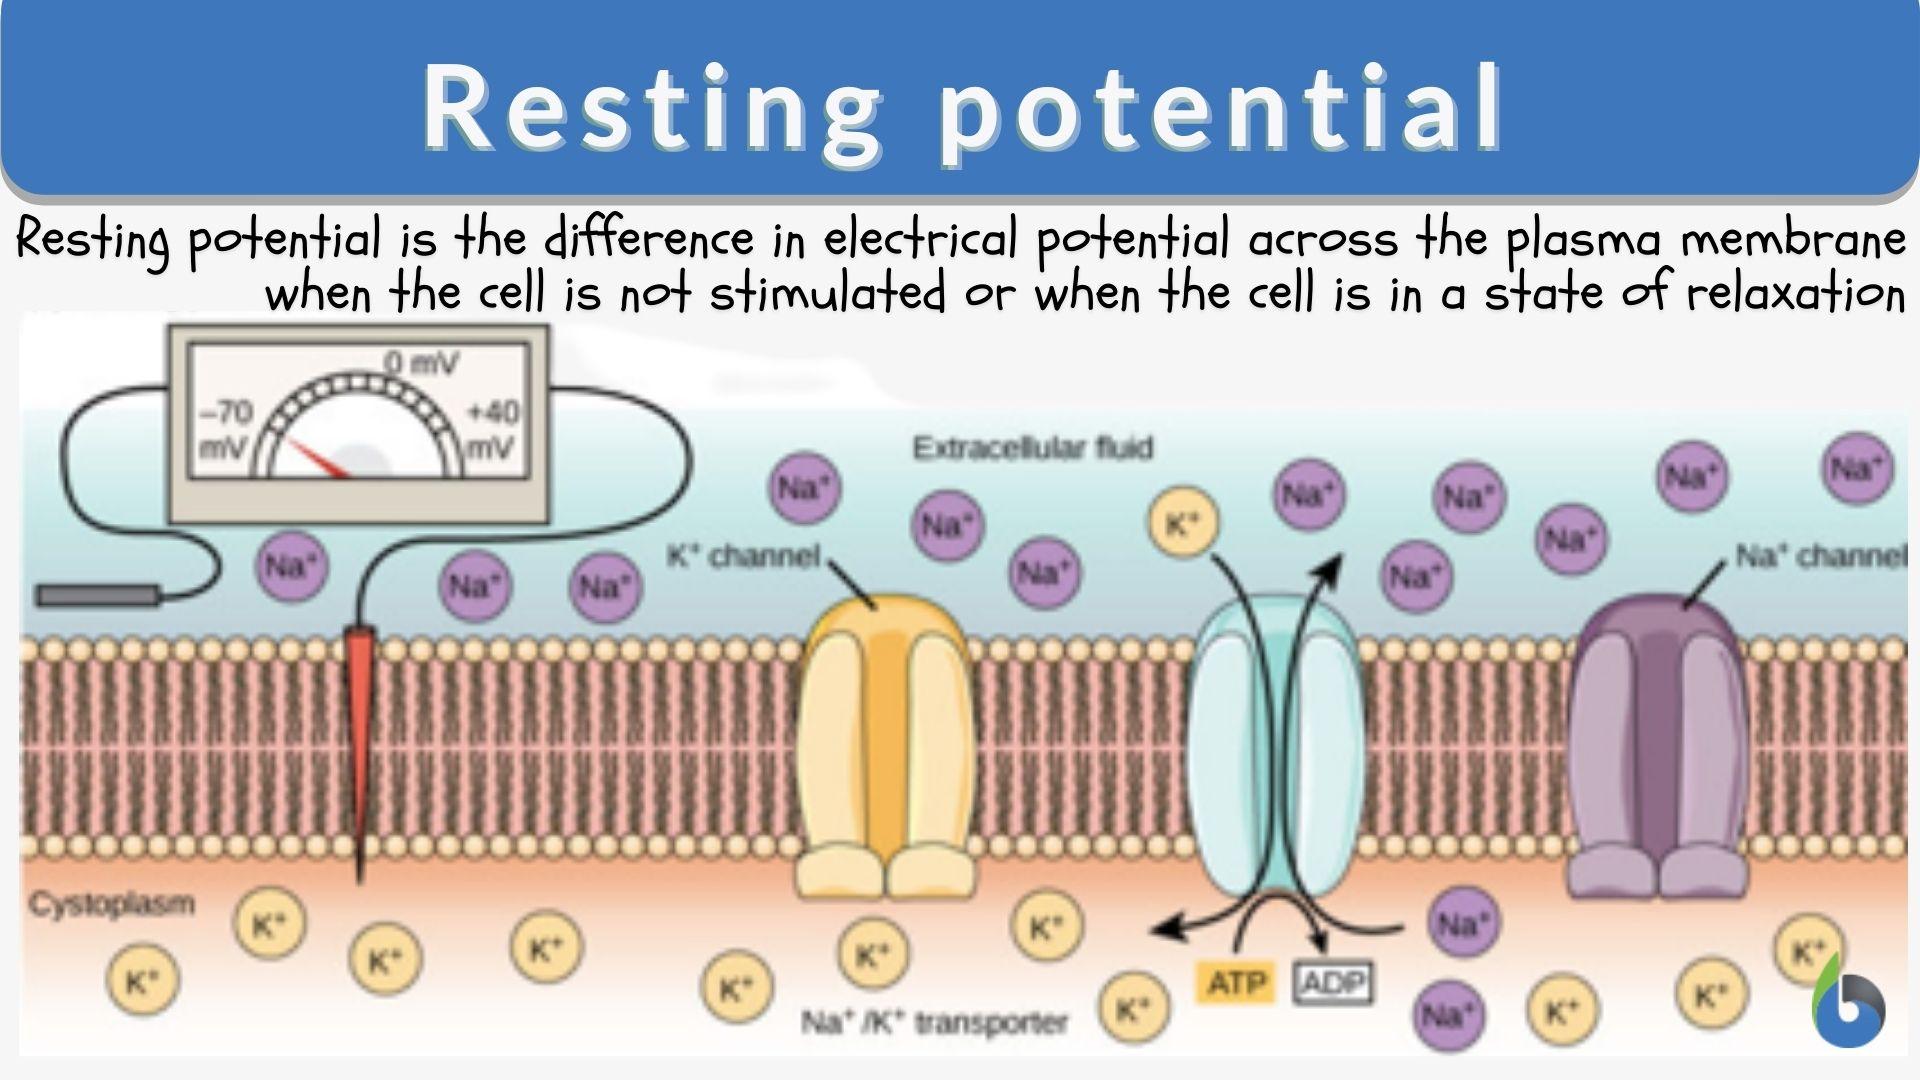 Resting potential Definition and Examples - Biology Online Dictionary